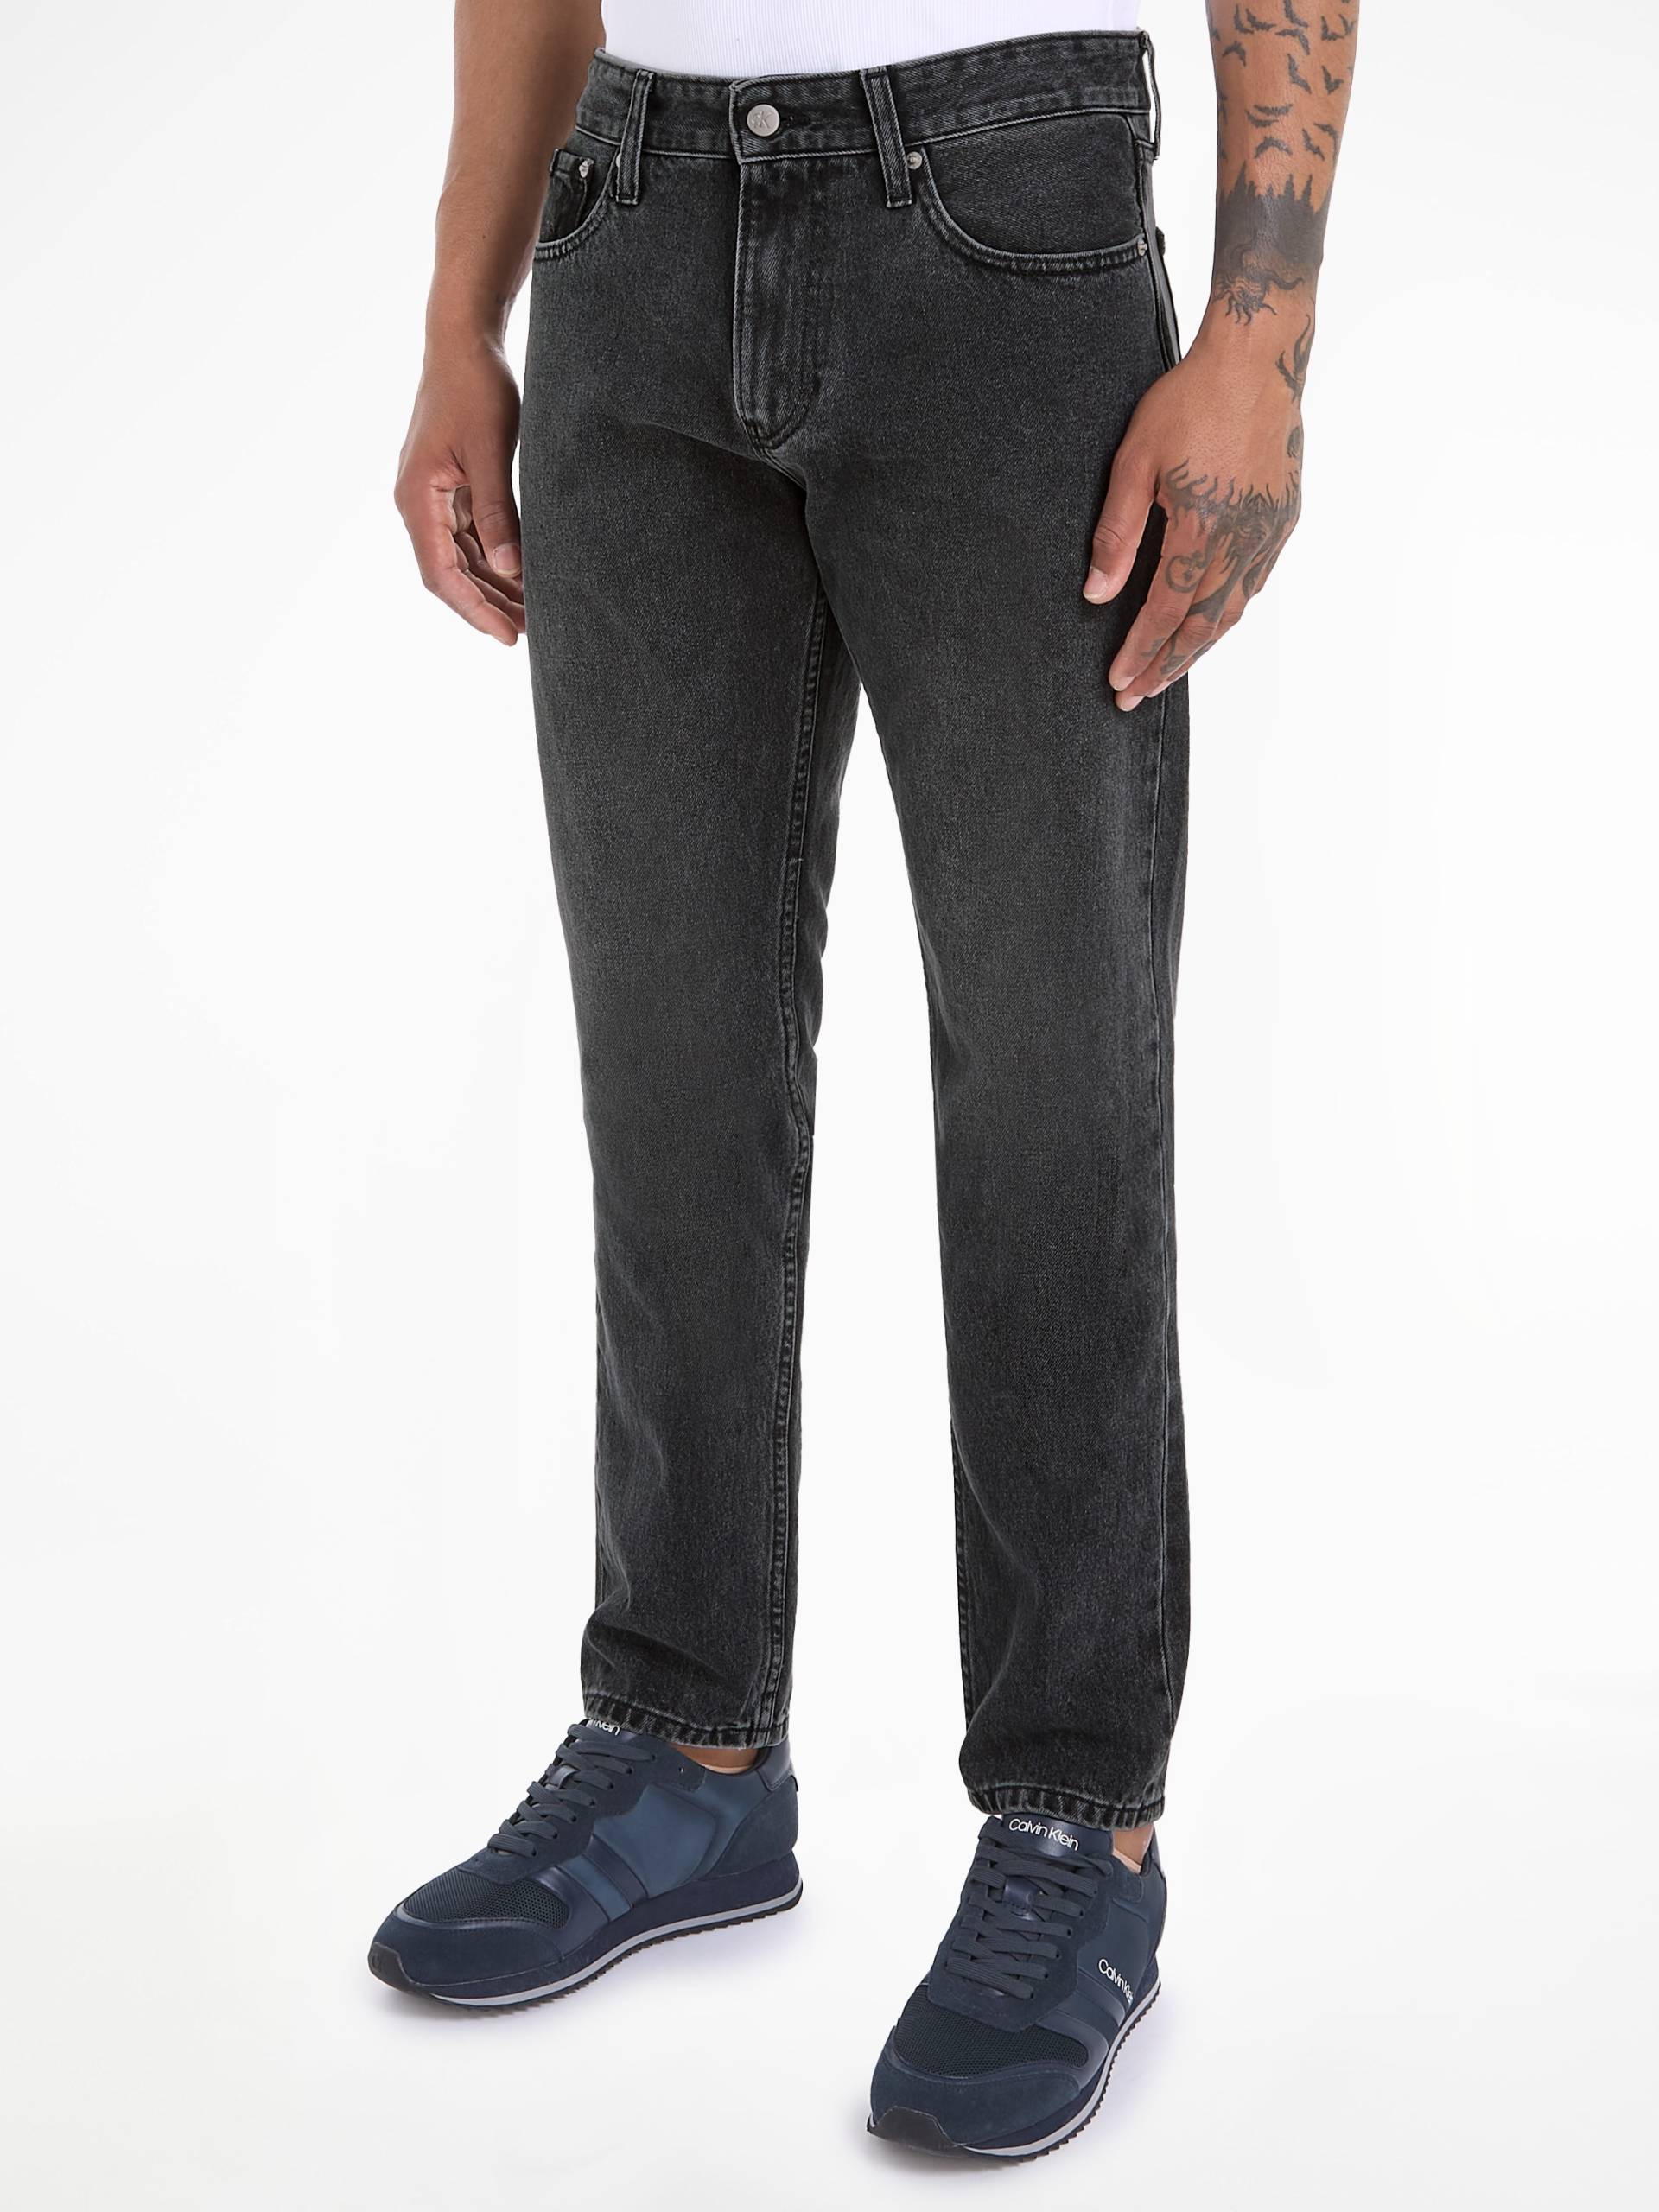 Calvin Klein Jeans Straight-Jeans »AUTHENTIC STRAIGHT«, im 5-Pocket-Style von Calvin Klein Jeans